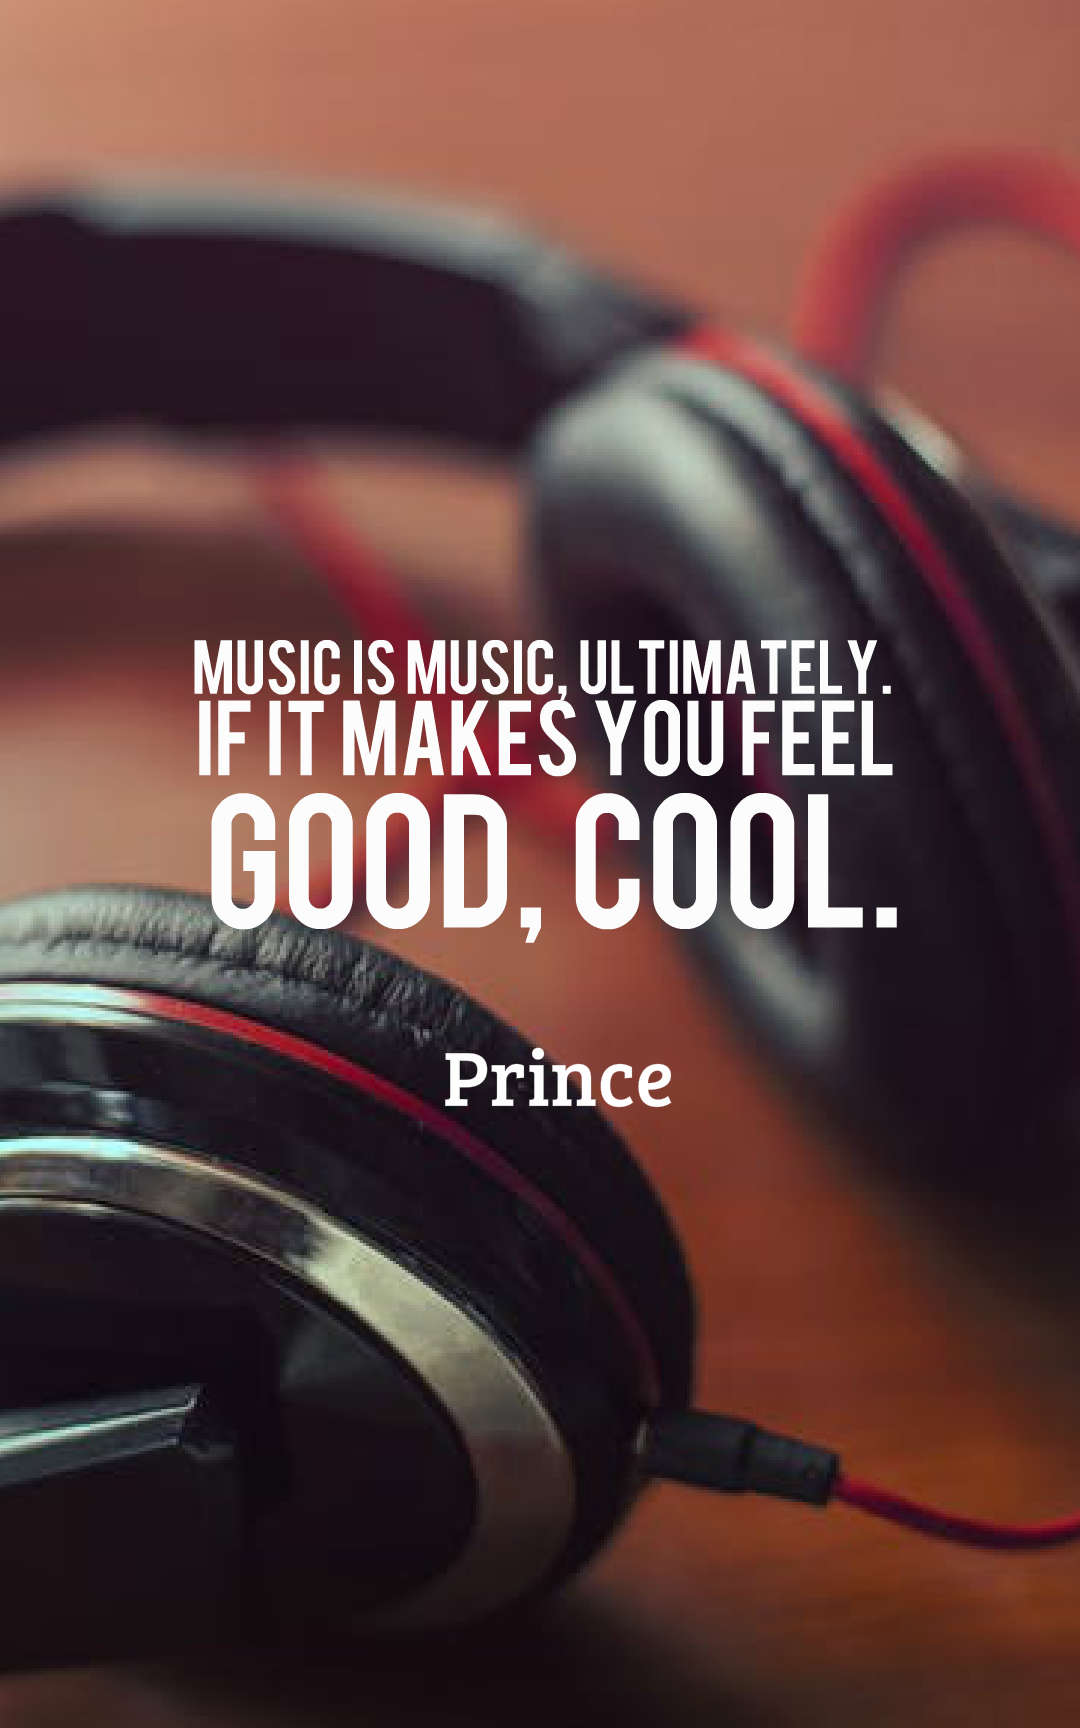 Music is music, ultimately. If it makes you feel good, cool.